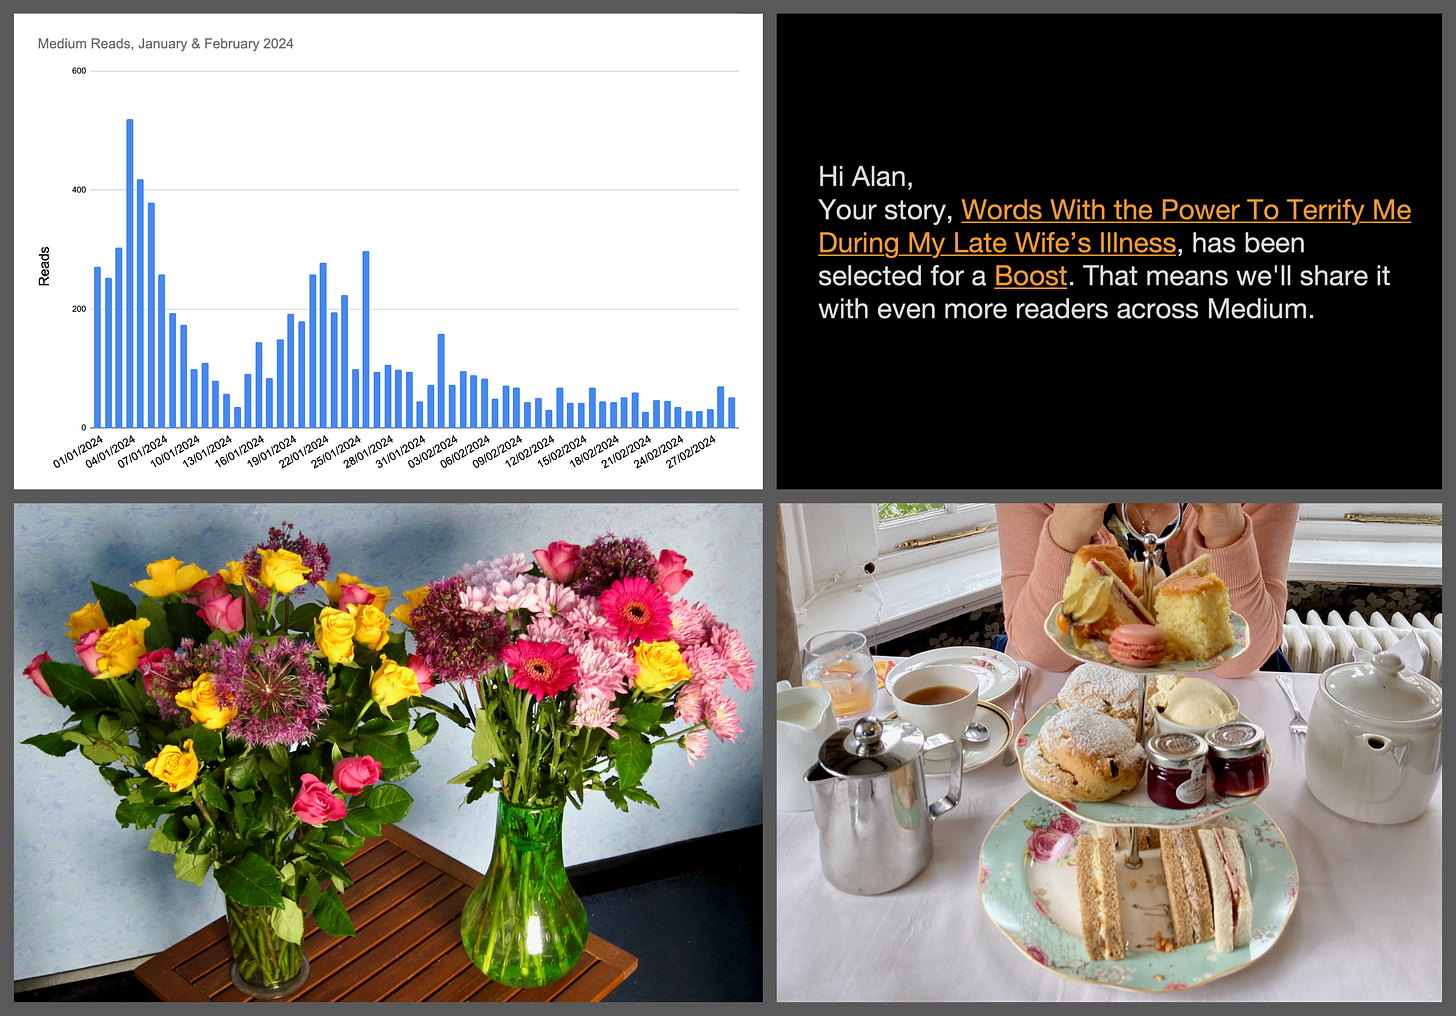 Collage of four images: Graph of falling Medium reads, an email about a boosted story, two vases of flowers, and afternoon tea.